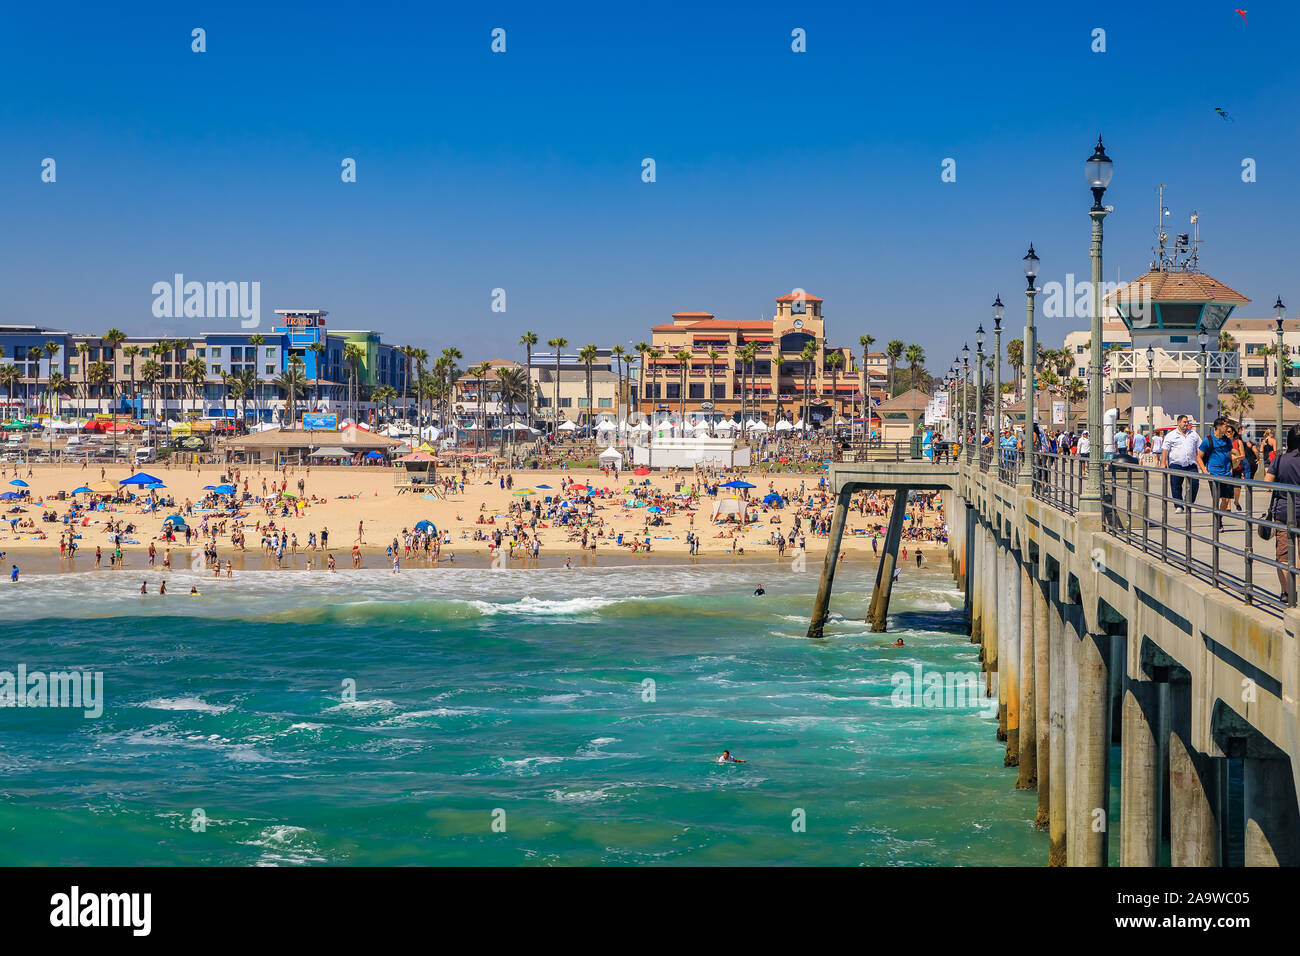 Huntington Beach, USA - July 10, 10: The pier, Pacific Ocean and